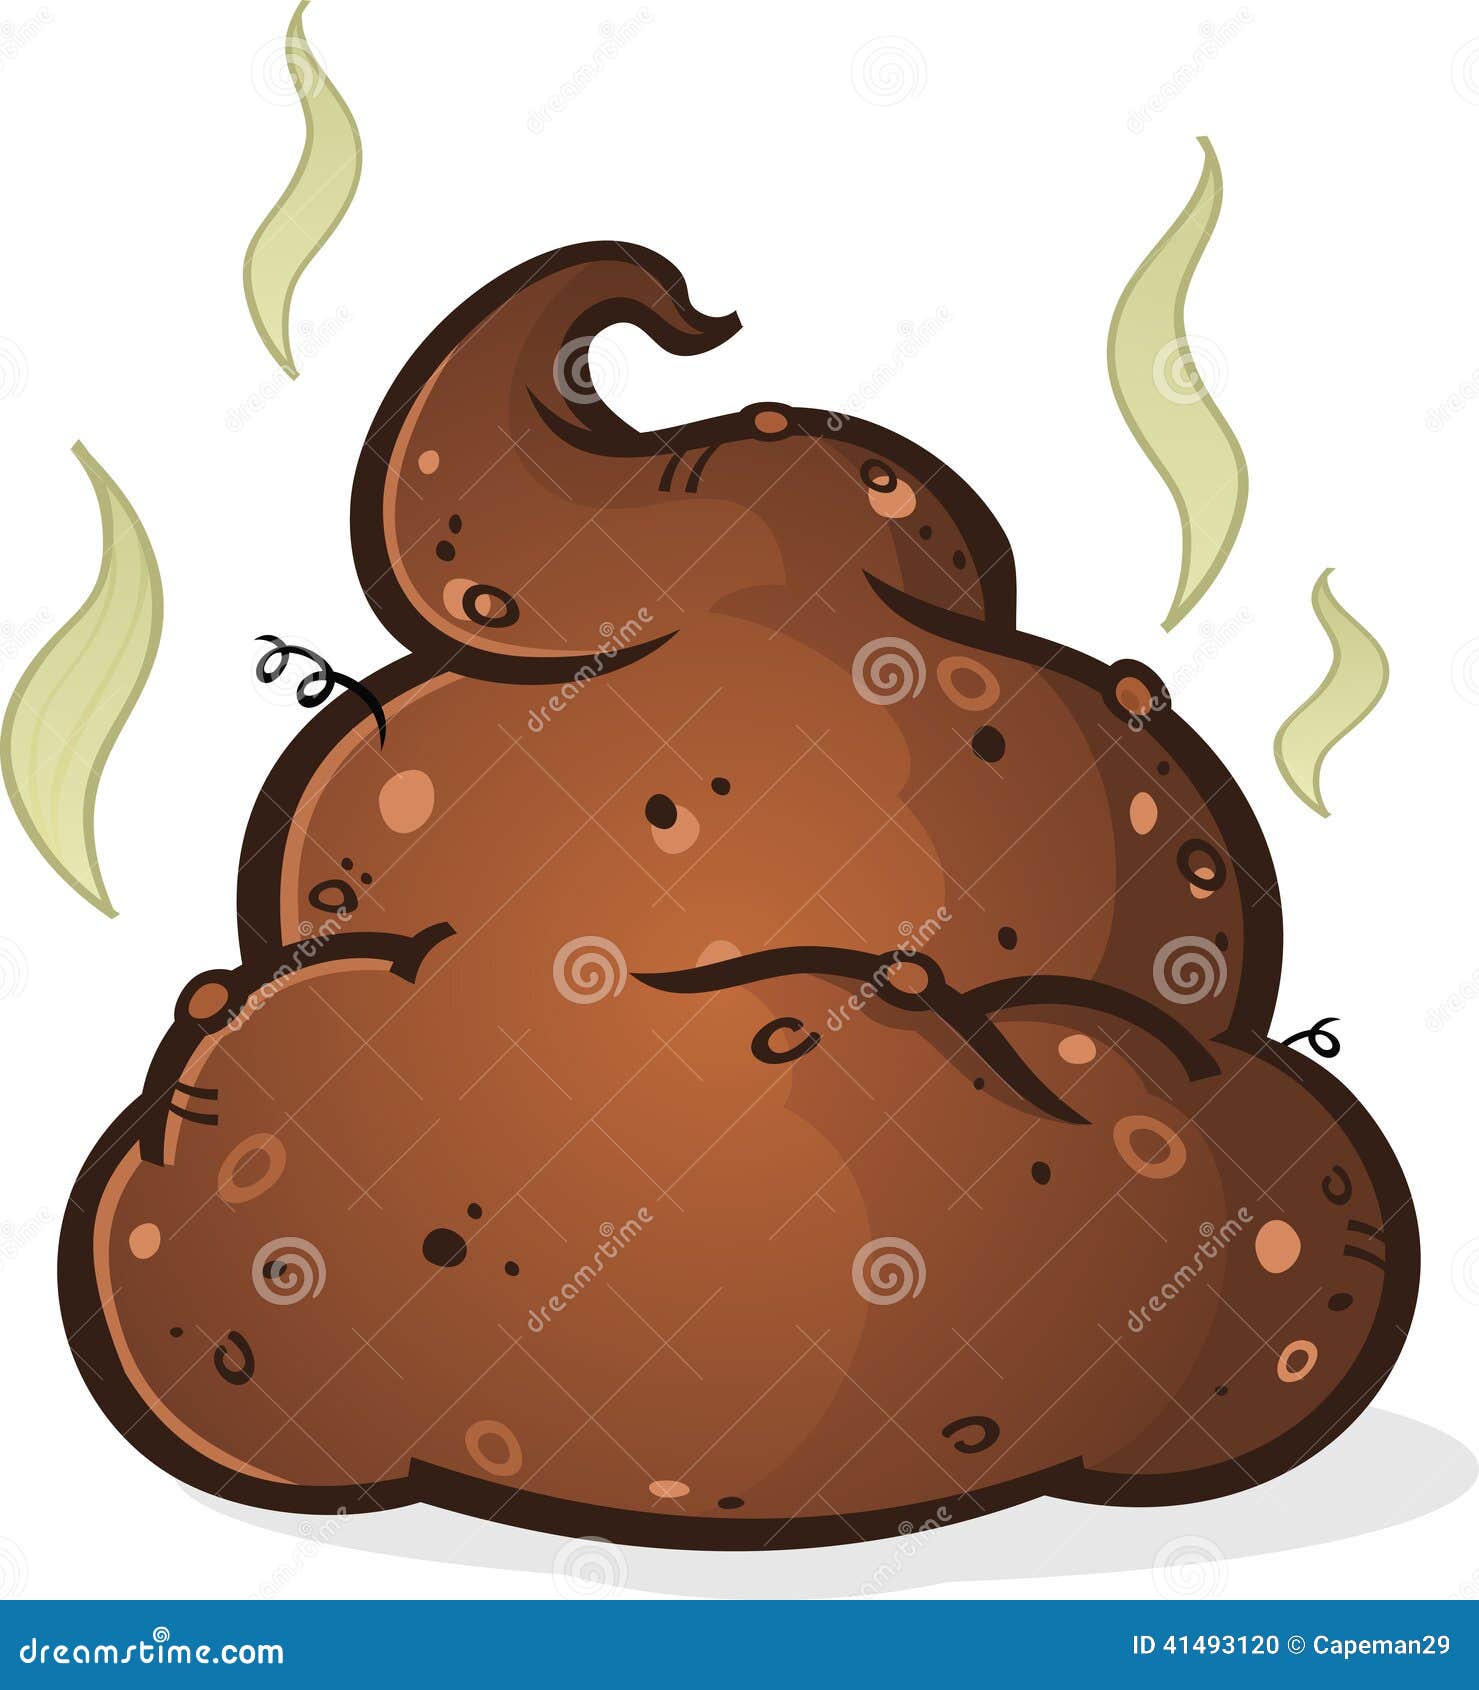 poop-pile-cartoon-smelly-stinky-fumes-41